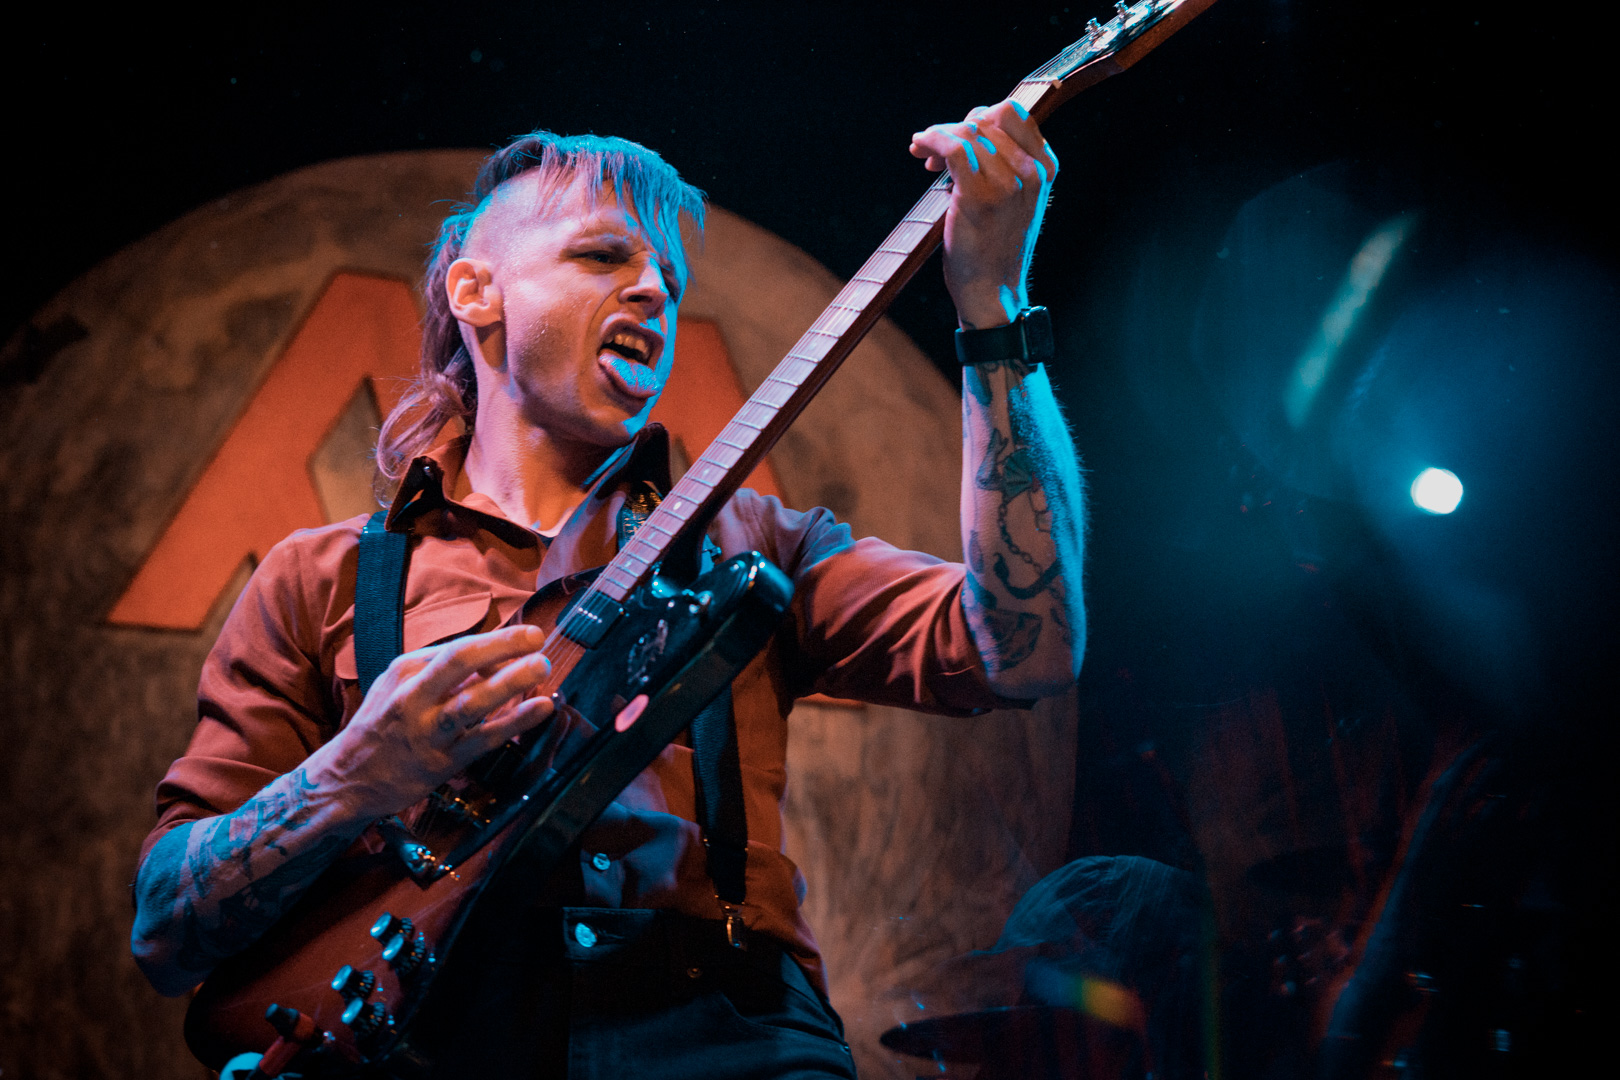 A man plays guitar with his tongue out on stage